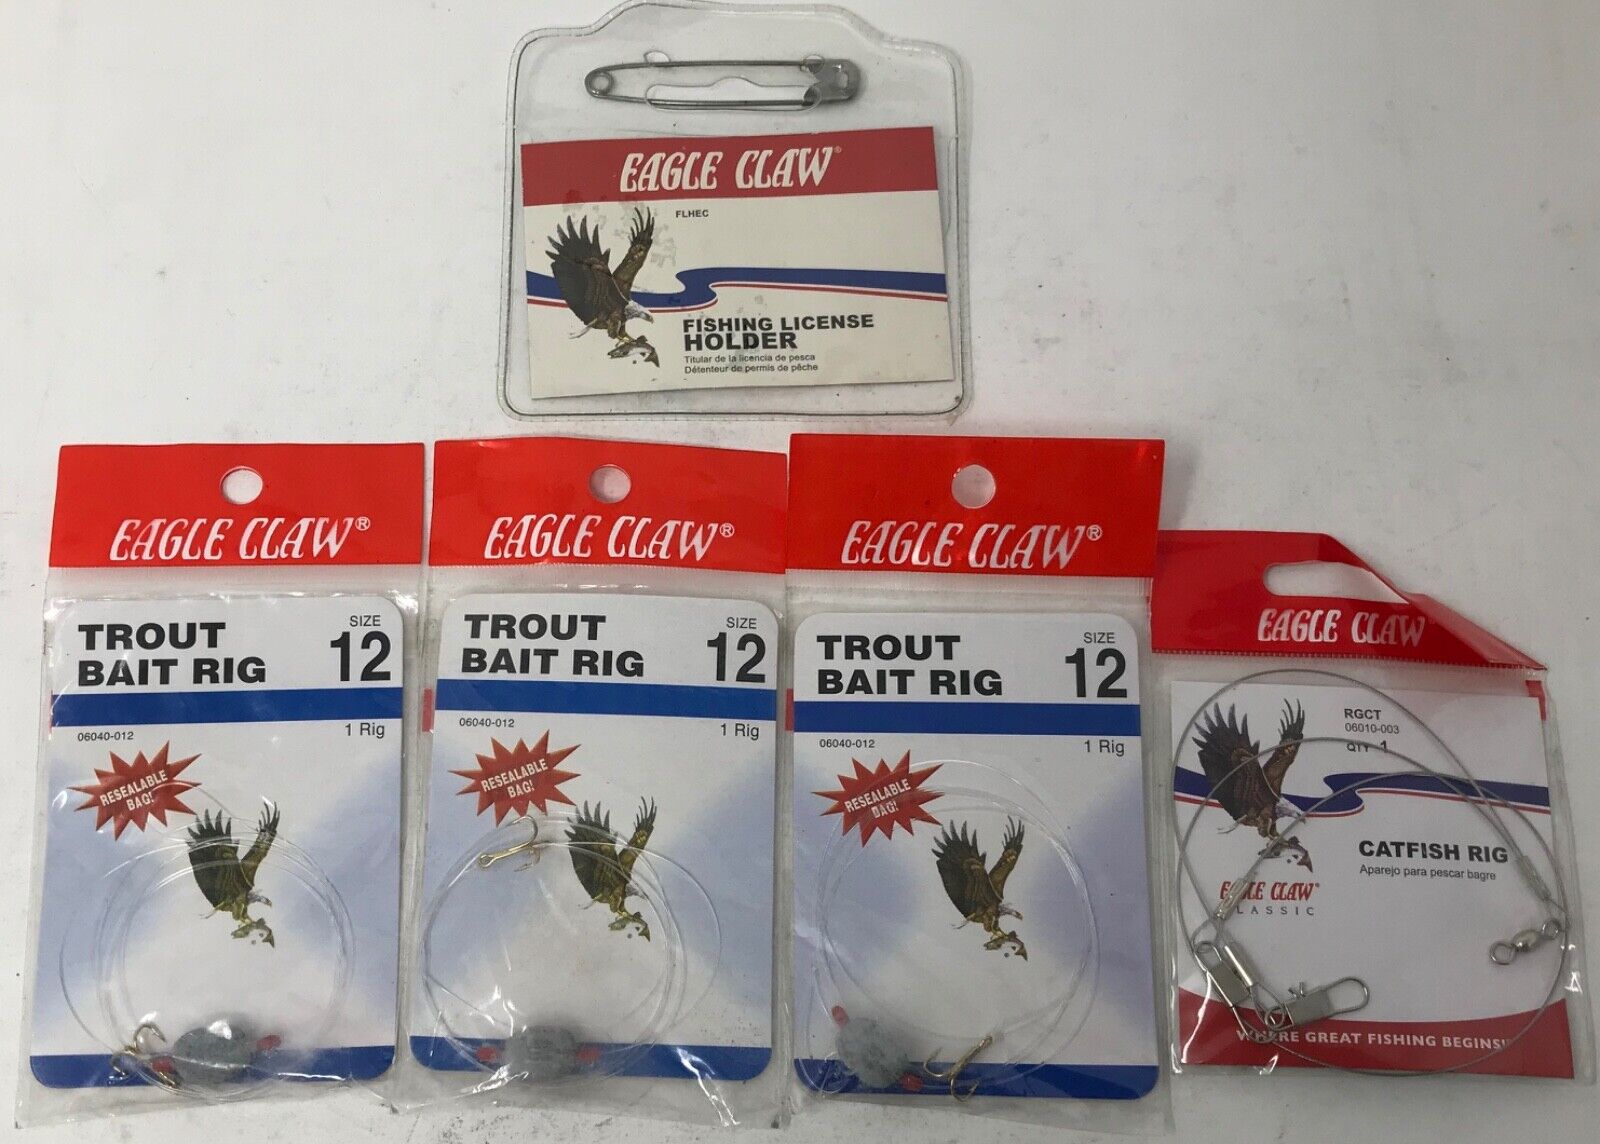 Eagle Claw Size 12 Trout Bait Rigs (3) + 1 Catfish Rig + Free Item  Eagle Claw Does Not Apply